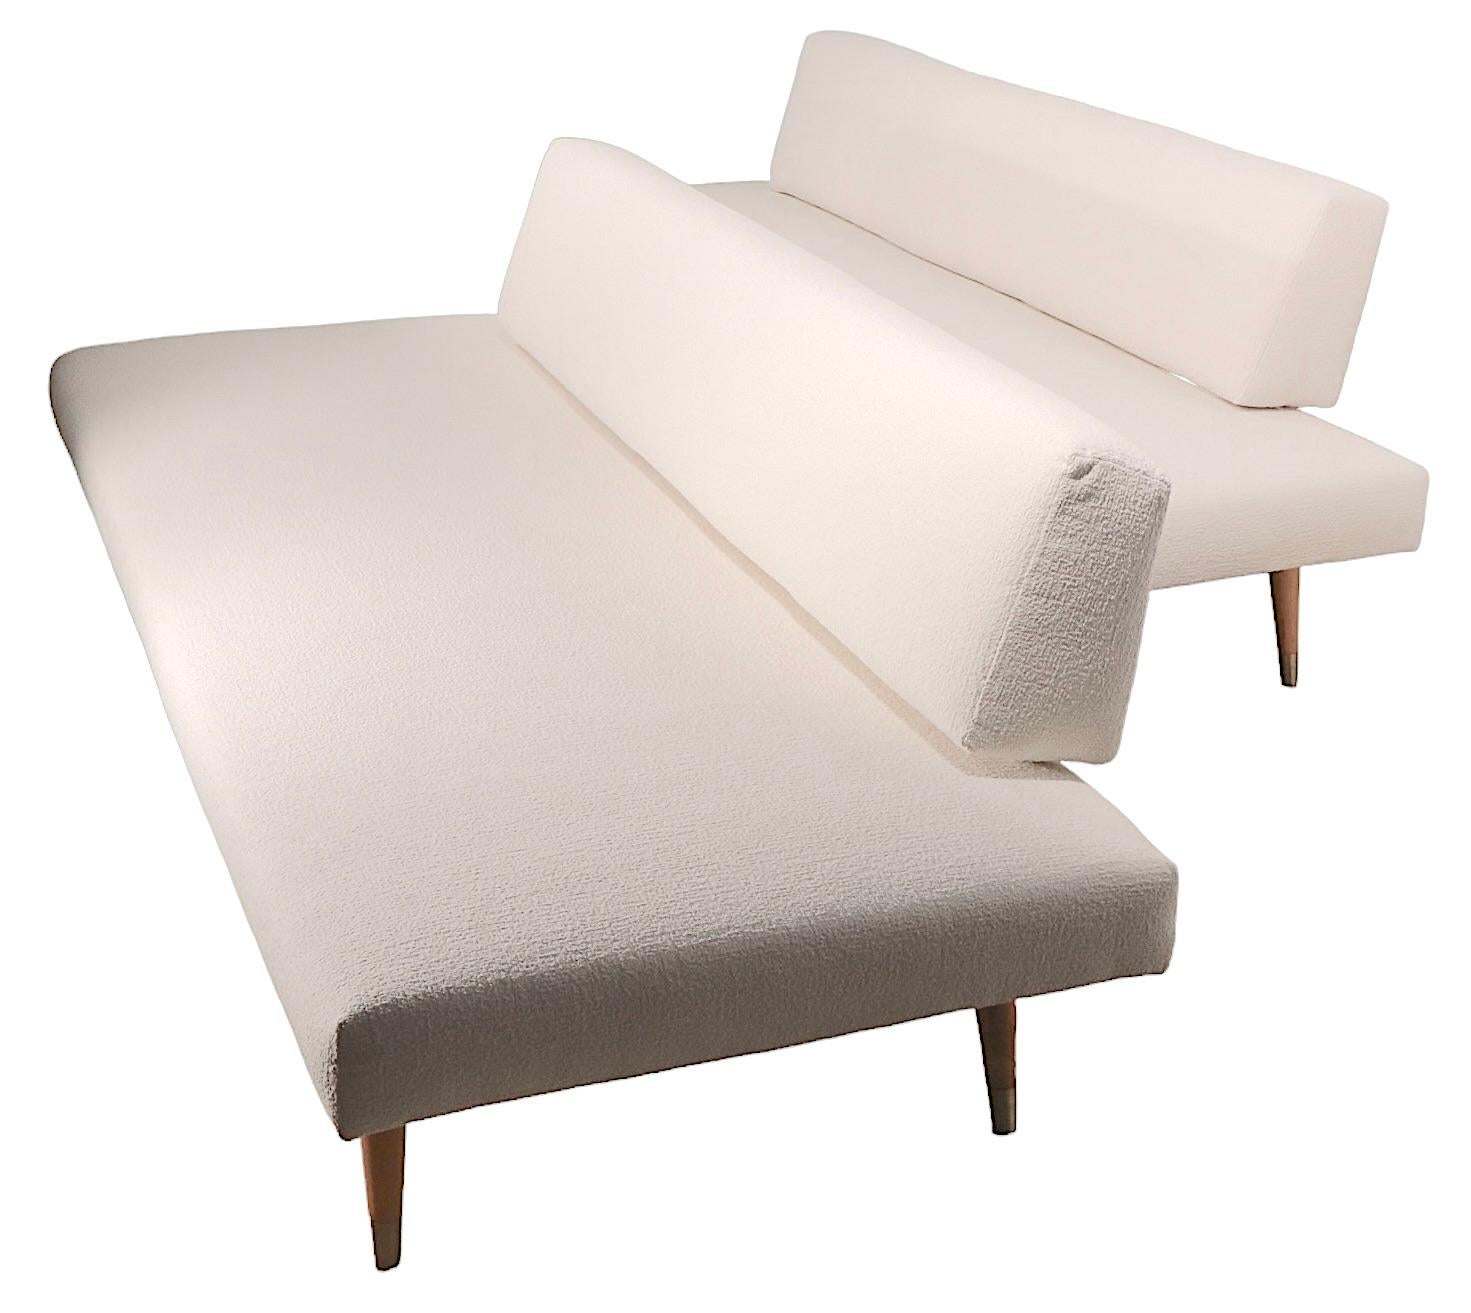 Pr. Mid Century Daybeds Newly Upholstered in Off White Boucle Fabric, c. 1950's 3